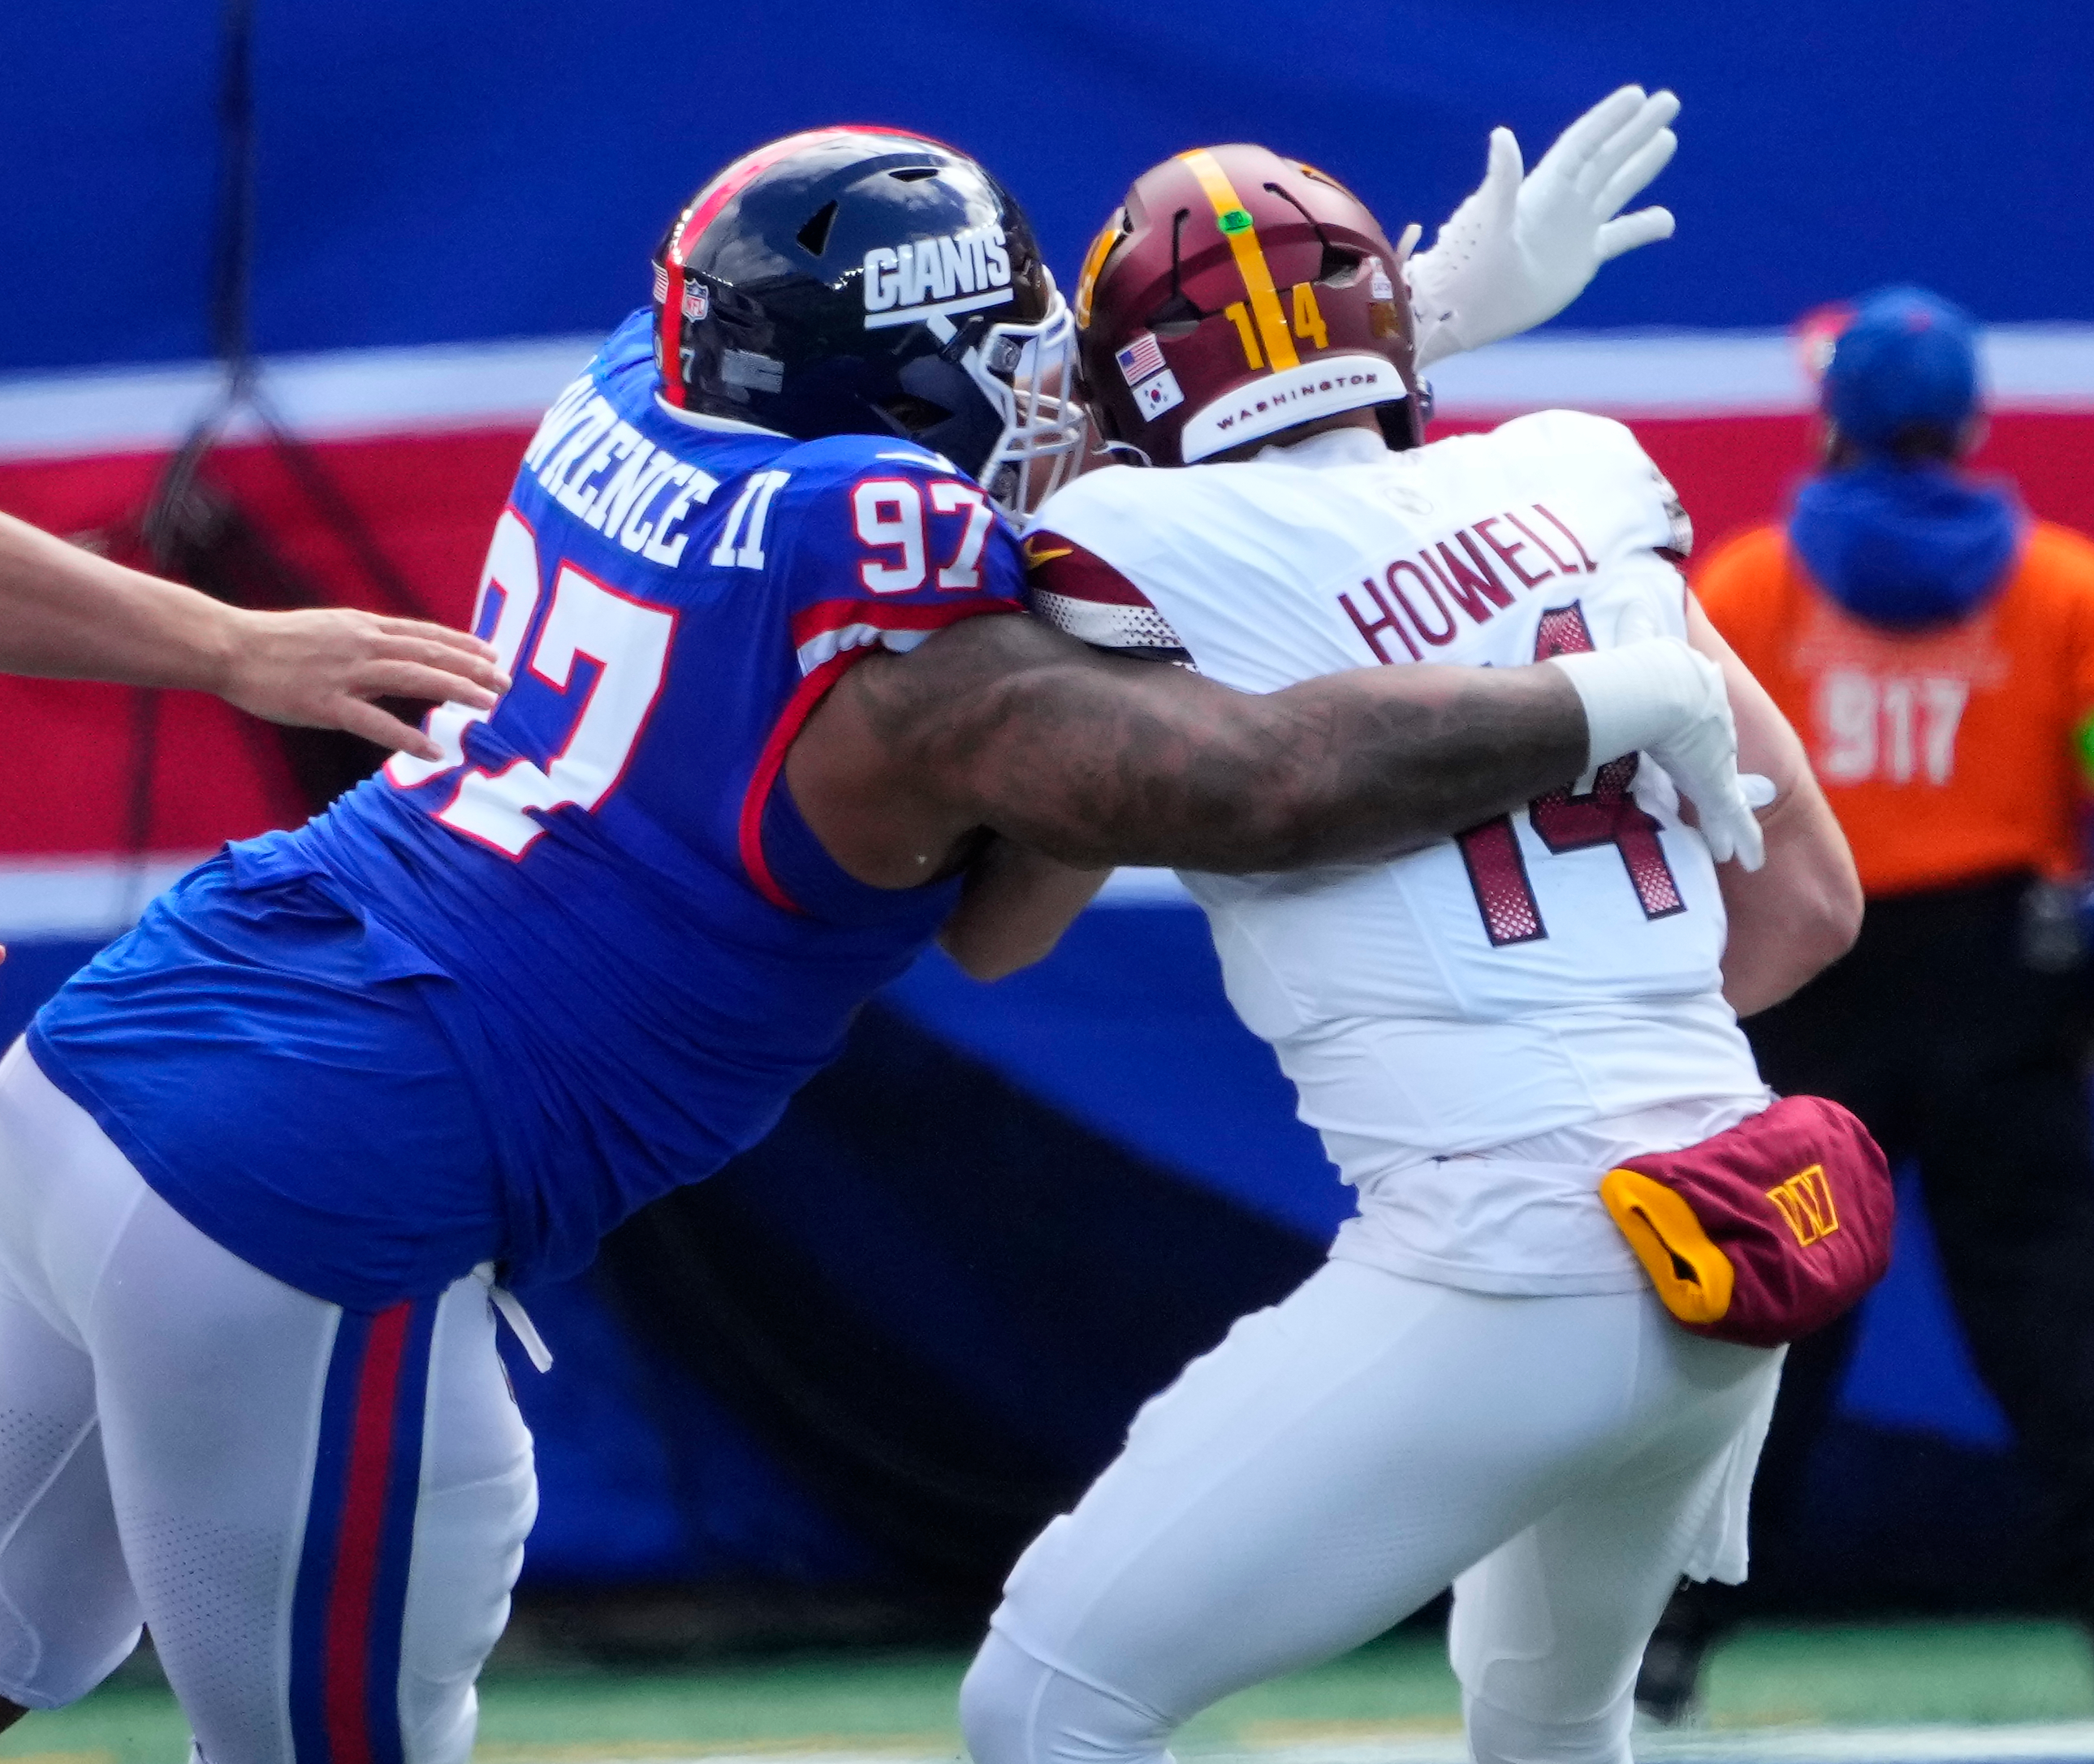 NY Giants: 'Resiliency wins' as Big Blue finally delivers on promise